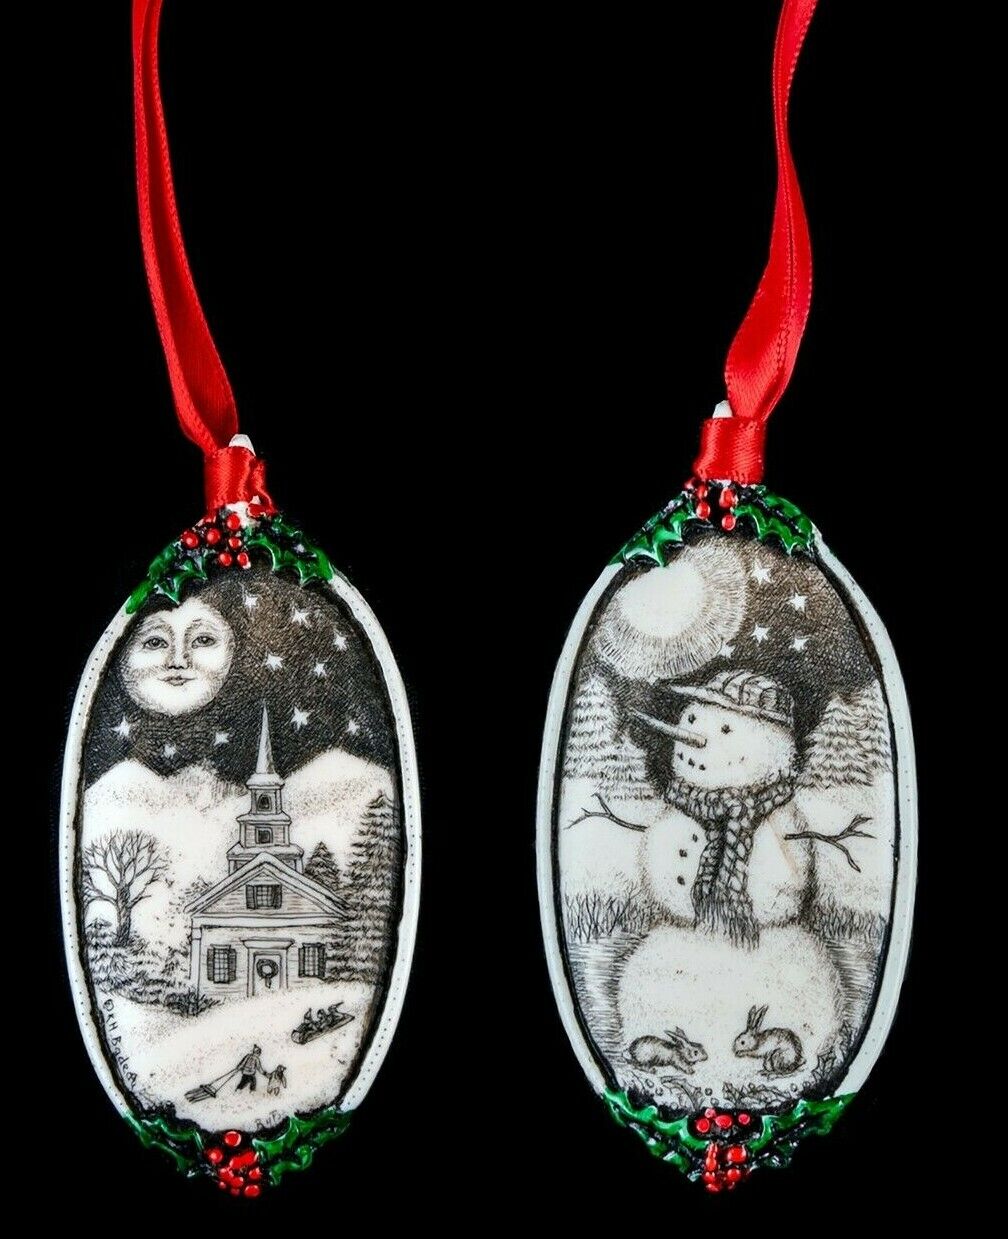 Double Sided Winter Themed Ornament.  Moosup Valley, Rachel Badeau, Etched